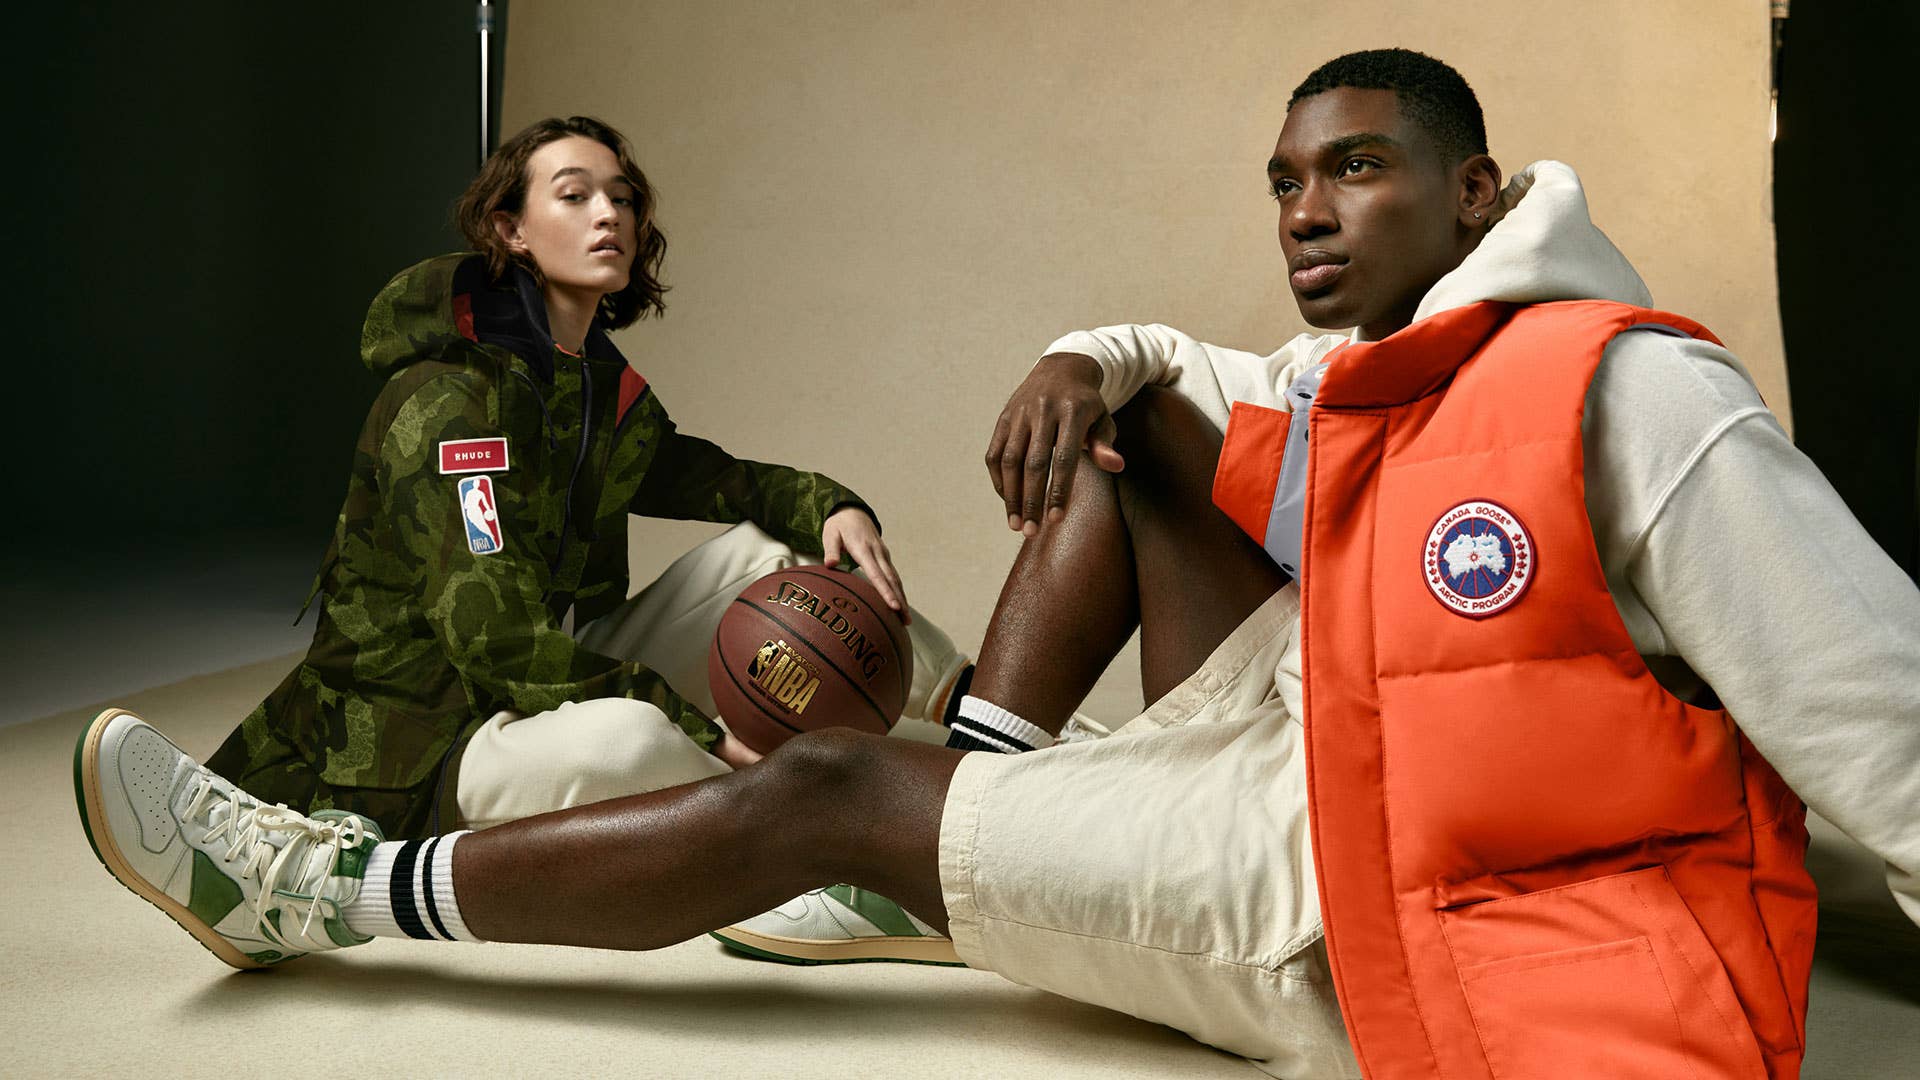 Canada Goose collection with Rhude and NBA